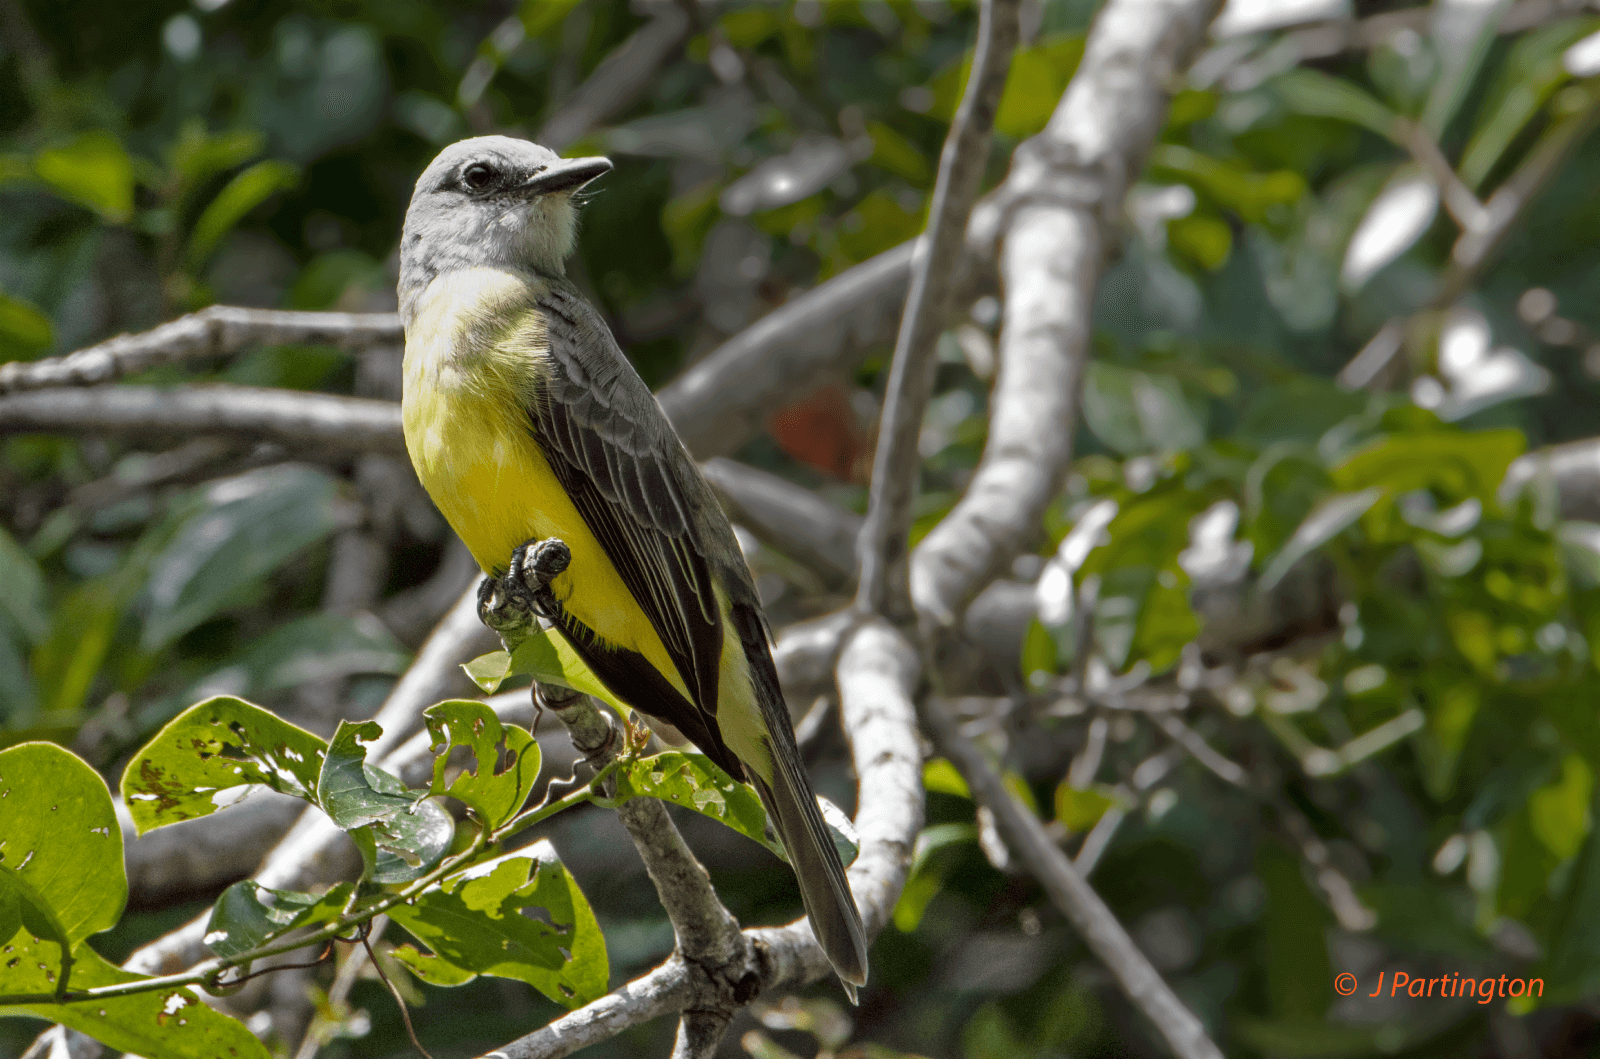 Smooth-billed Anis